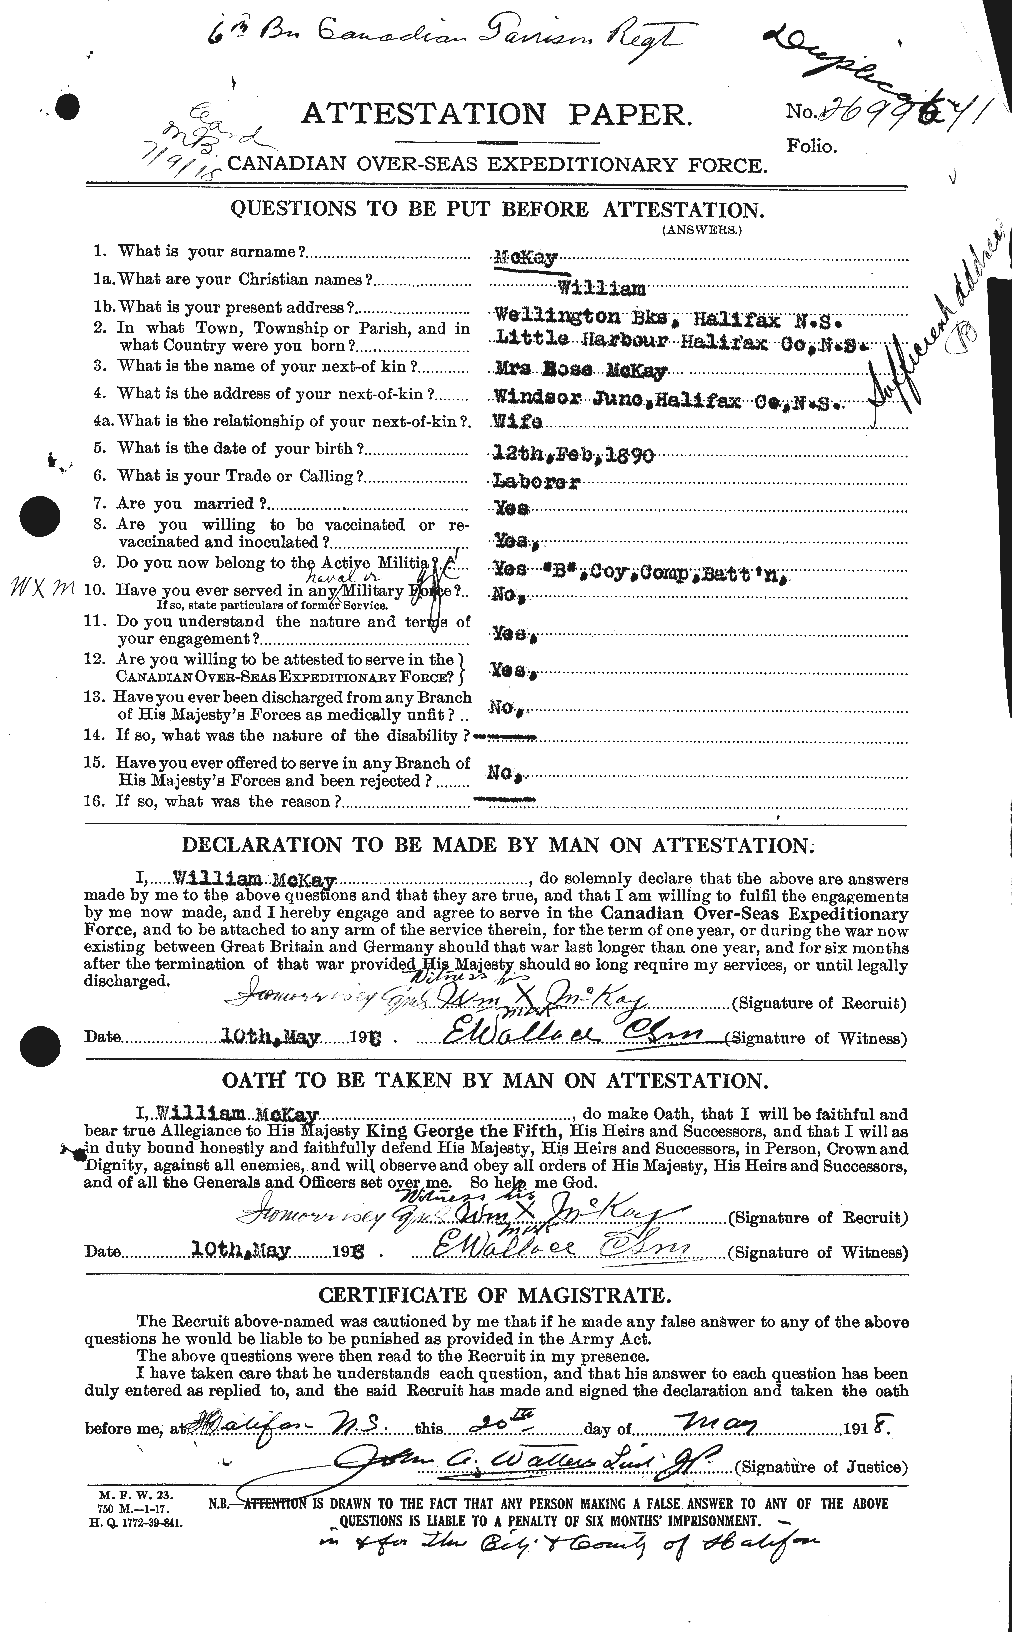 Personnel Records of the First World War - CEF 530231a